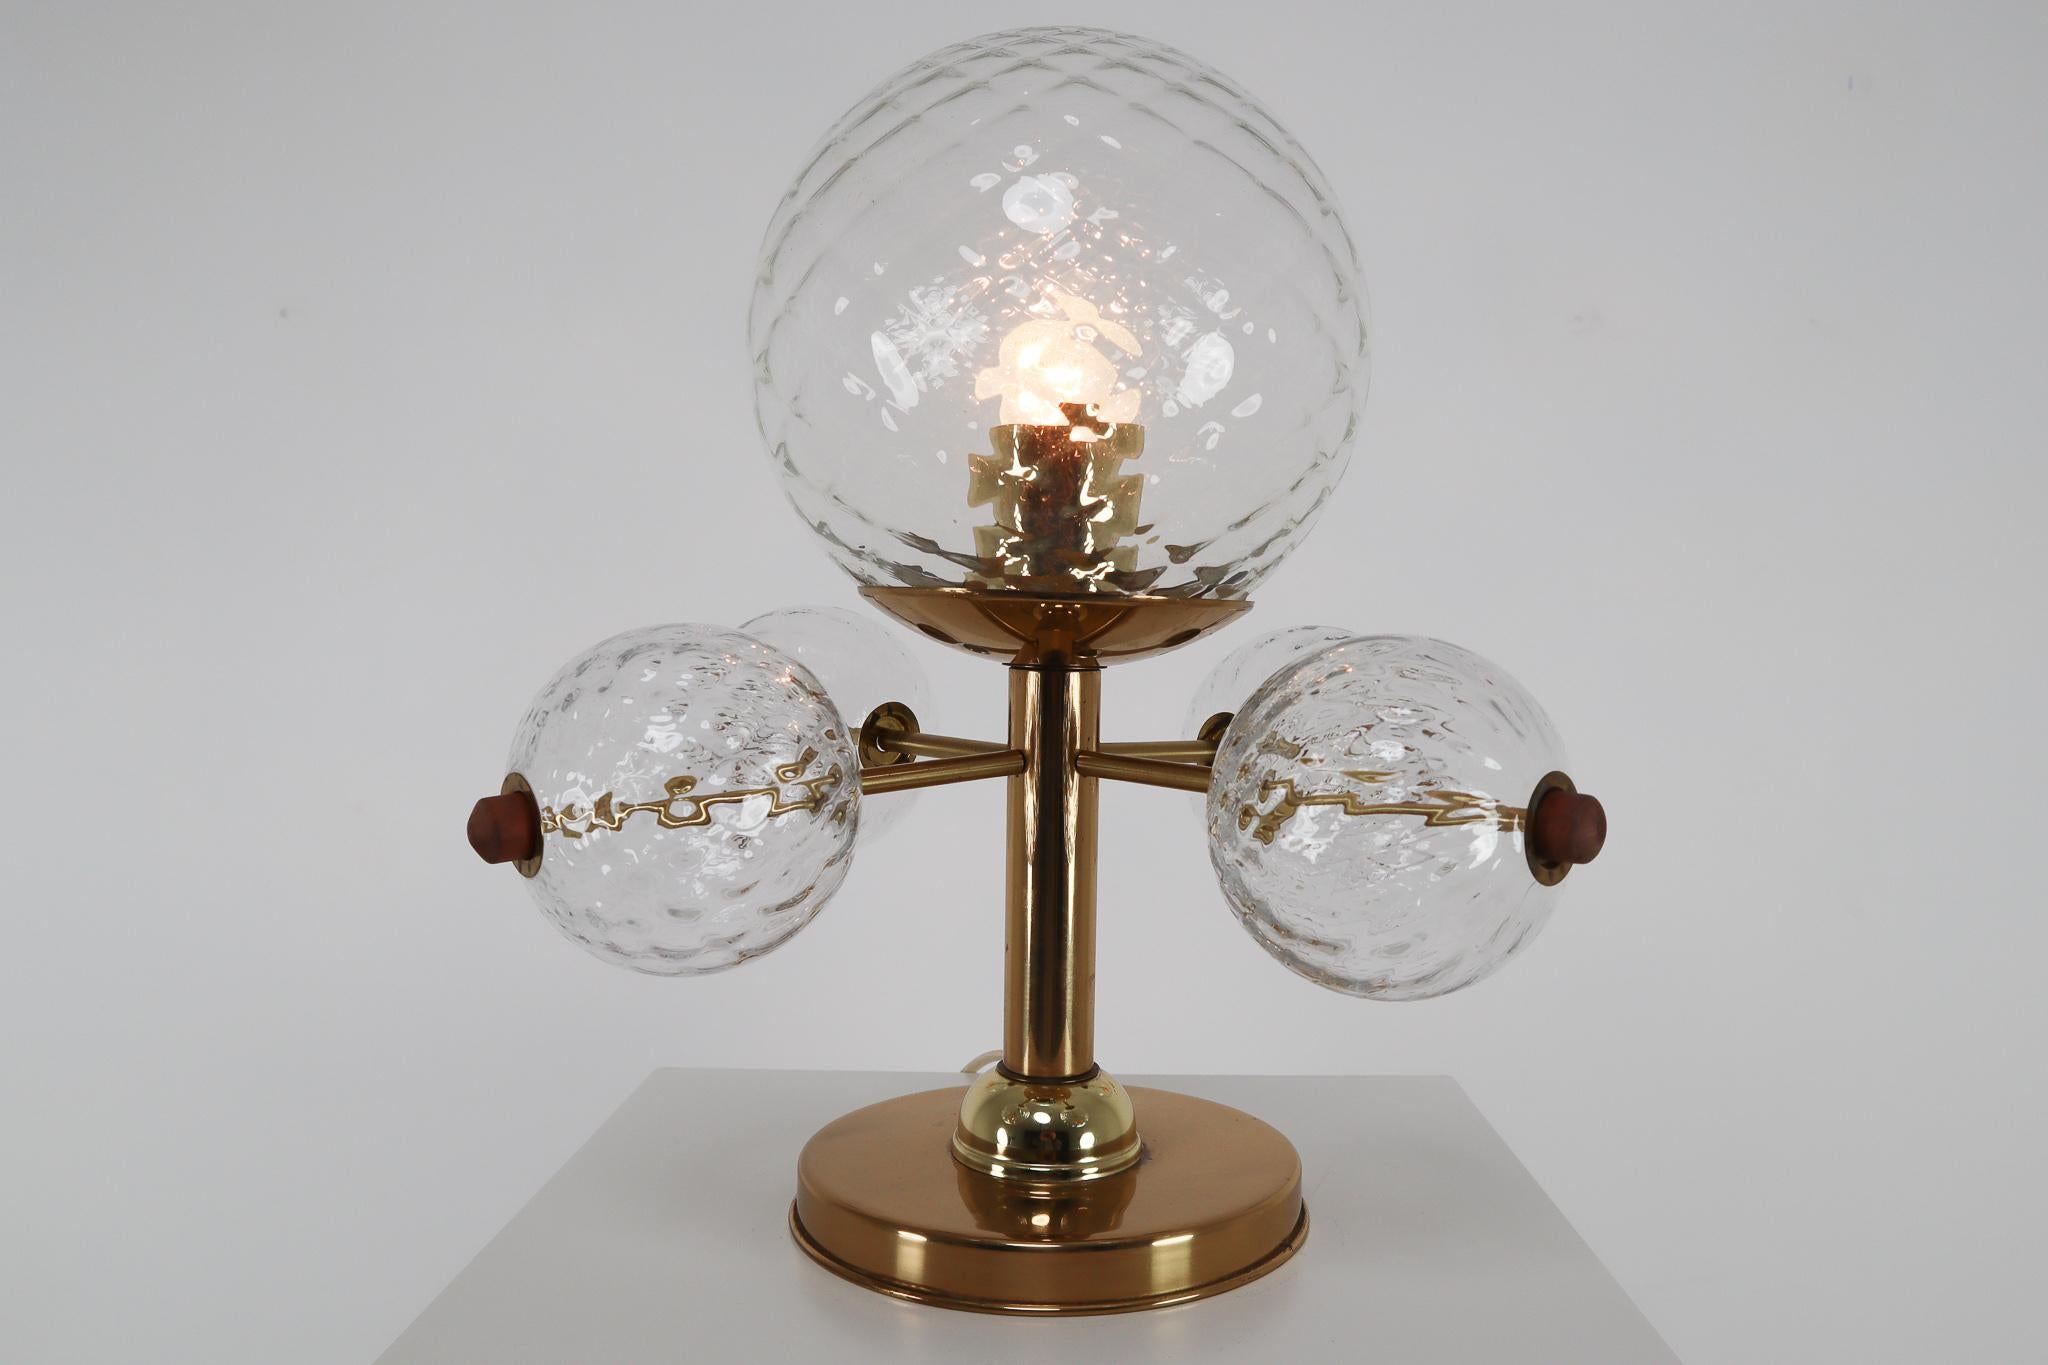 Midcentury Table Lamp with Brass Fixture and Structured Glass, Europe, 1970s In Good Condition For Sale In Almelo, NL